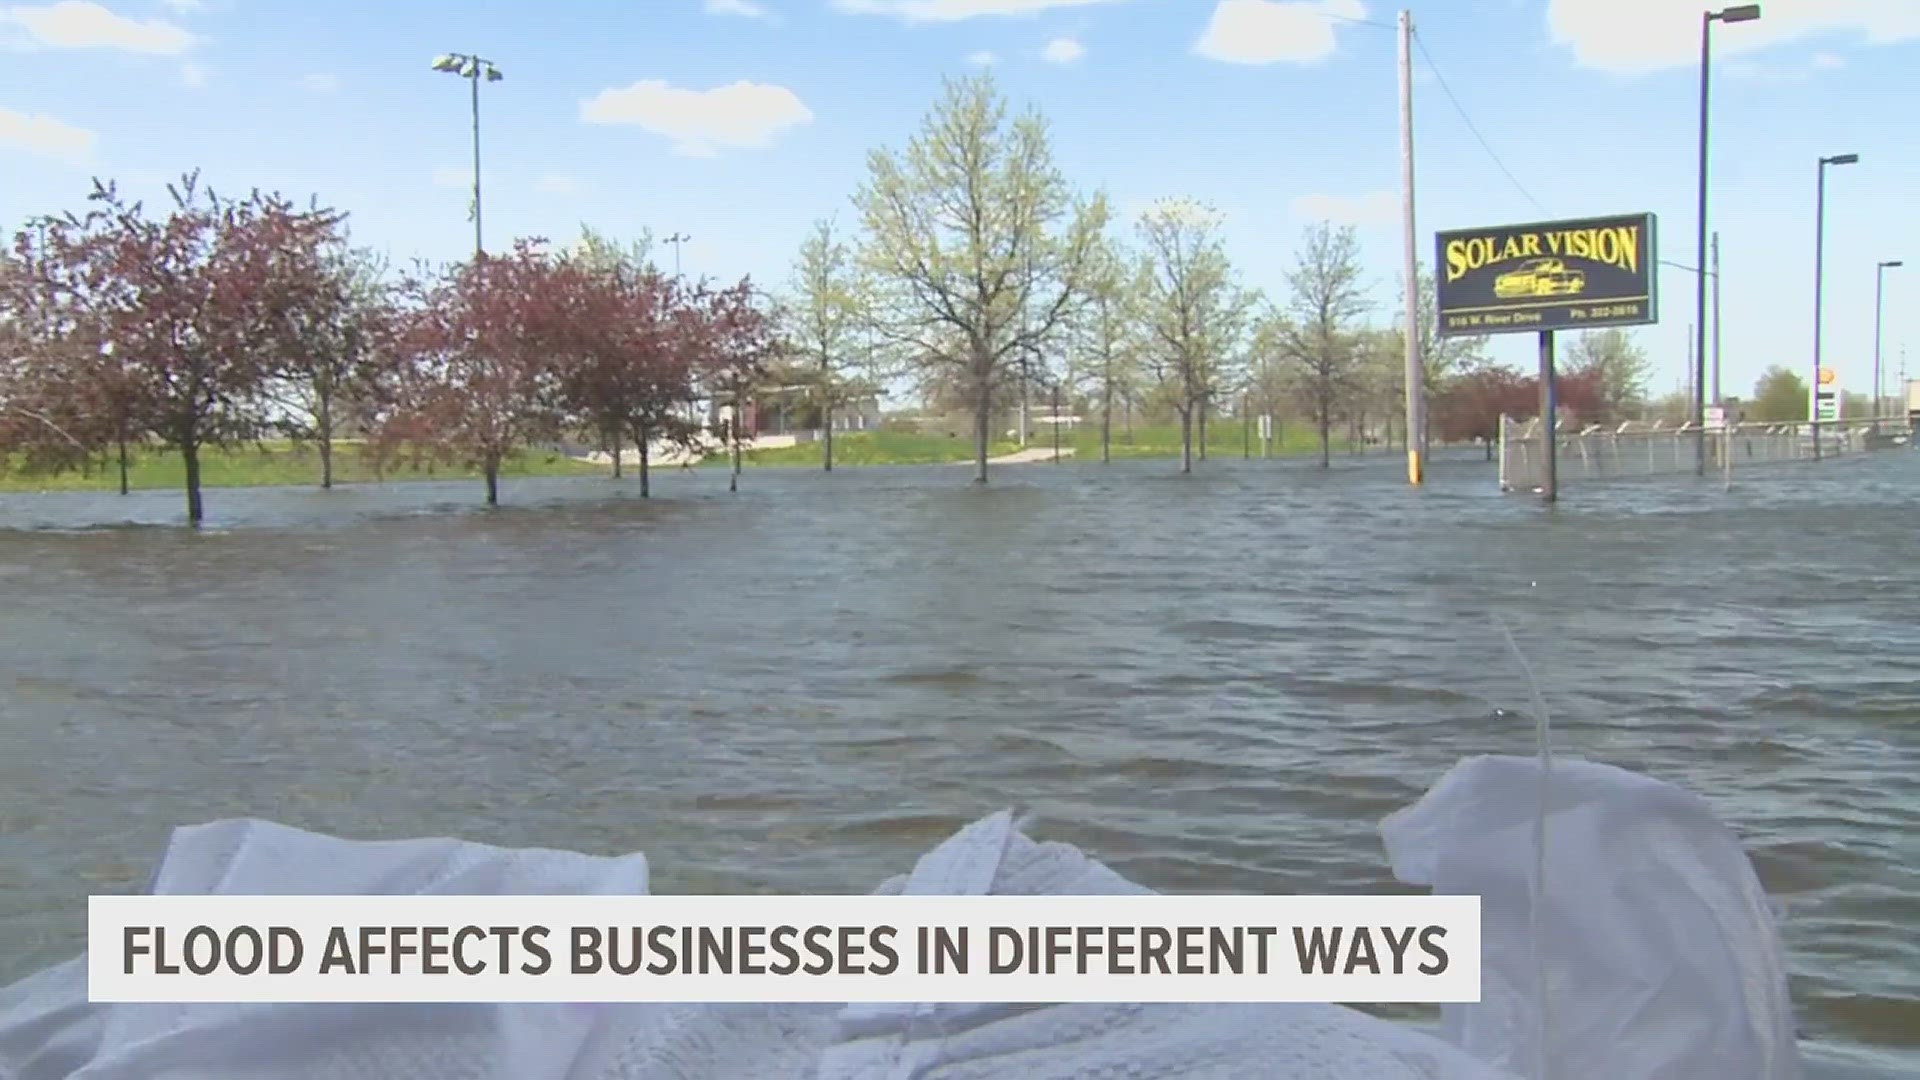 The flooding Mississippi River is pushing customers away from some businesses, however, other businesses are reaping the benefits.